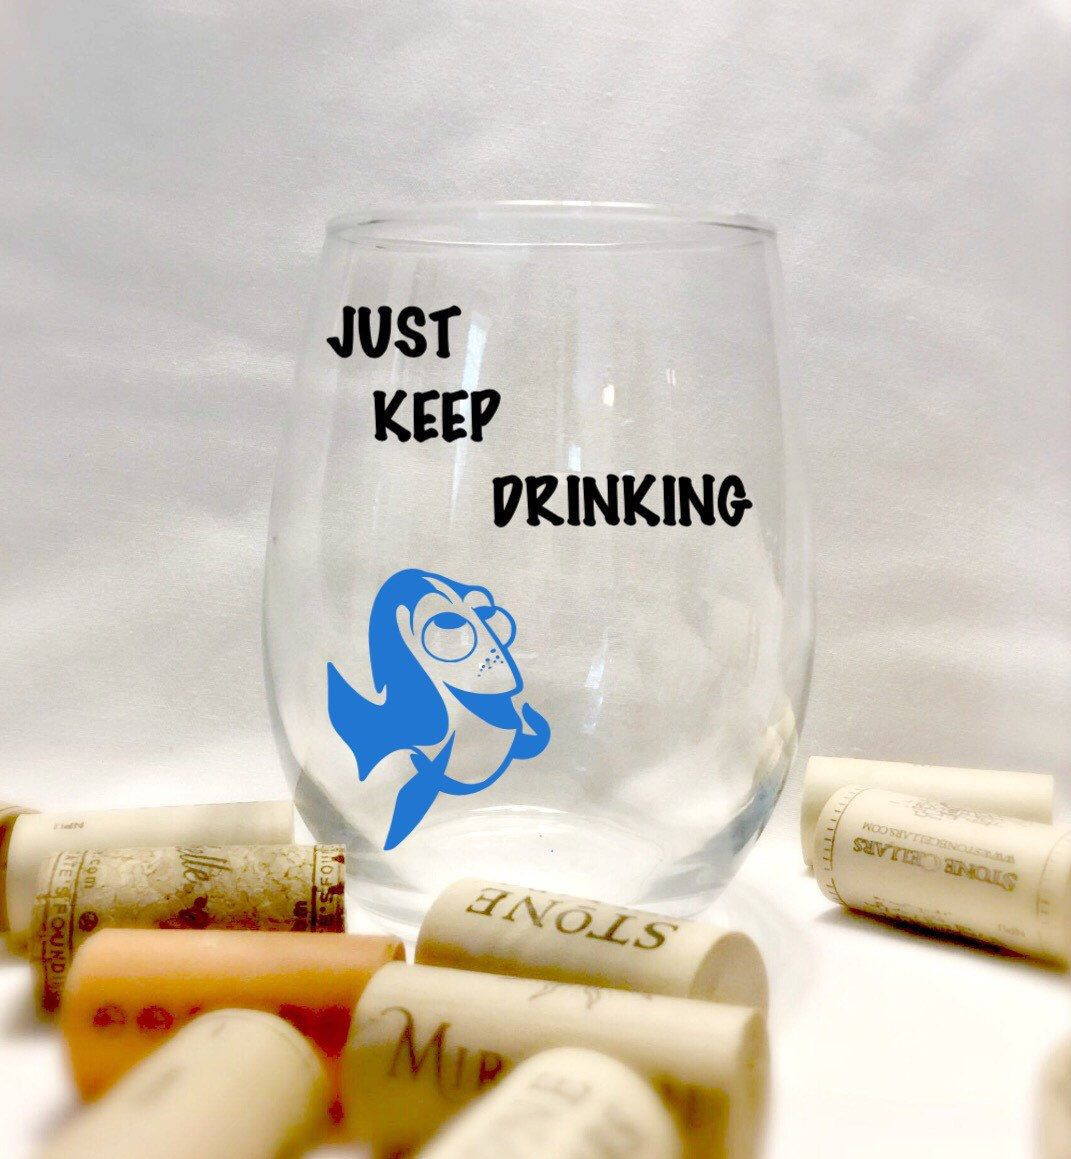 21st Birthday Drinking Quotes
 Just keep drinking Dory wine glass Use the coupon code